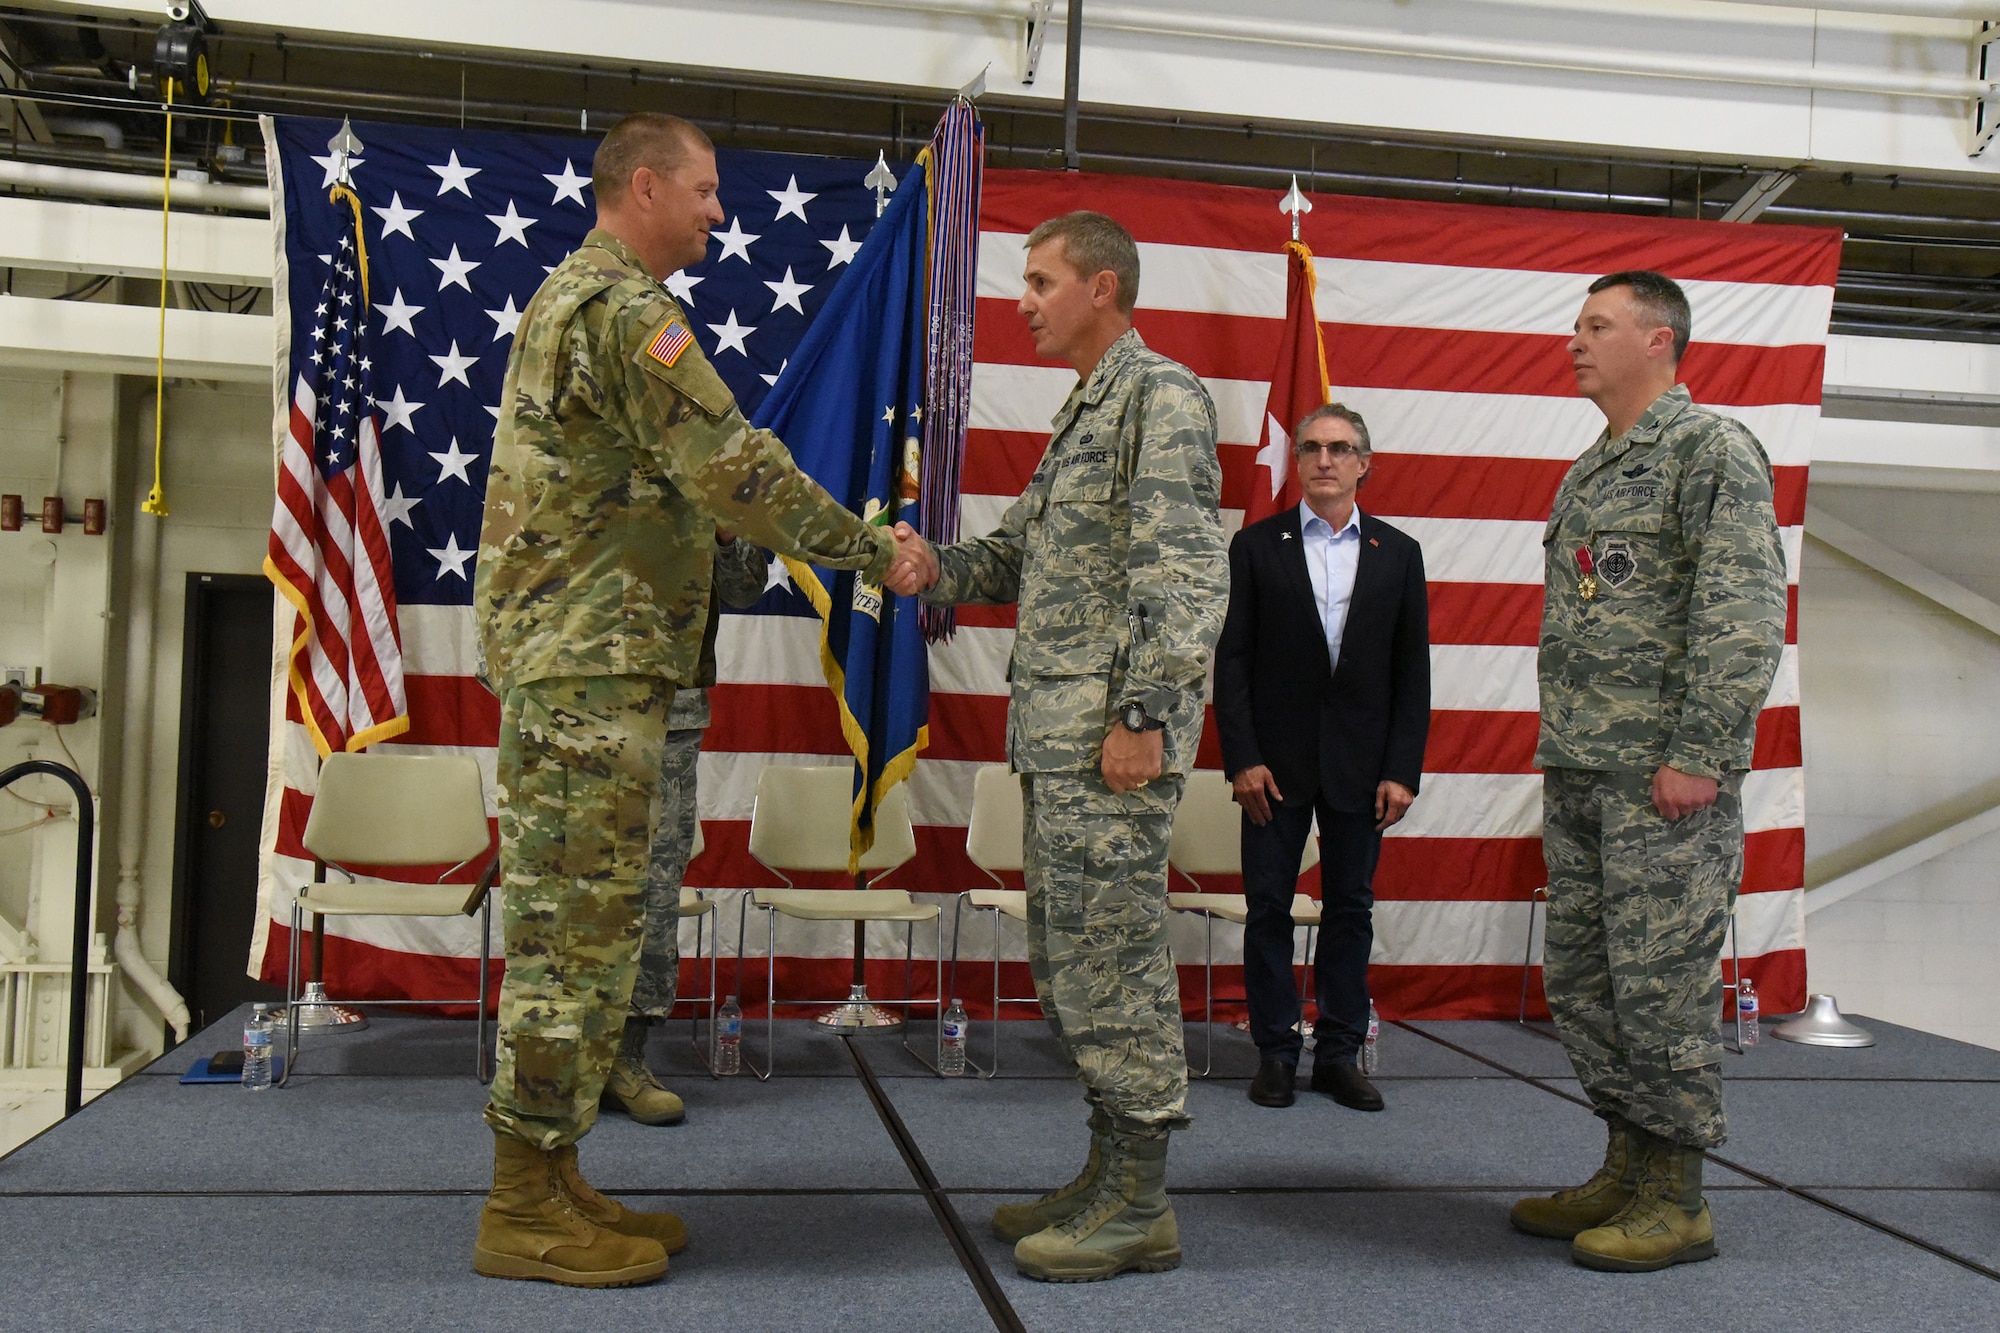 Maj. Gen. Al Dohrmann, the North Dakota adjutant general, left, congratulates Col. Darrin Anderson during a change of command ceremony at the North Dakota Air National Guard Base, Fargo, N.D., Aug. 4, 2018. Anderson is replacing Col. Britt Hatley, far right, the out-going 119th Wing commander.